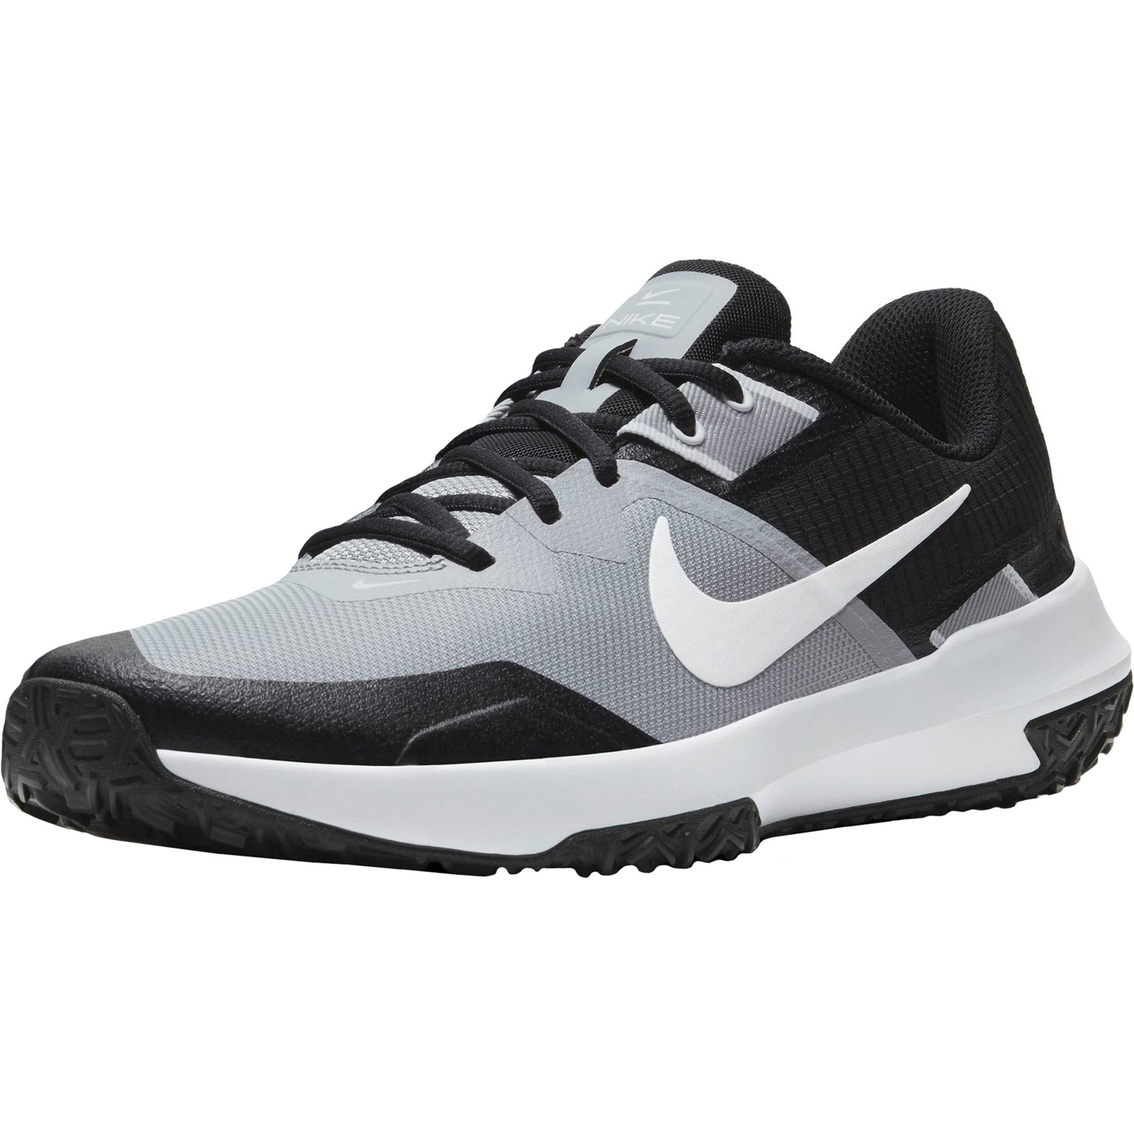 Varsity Compete Tr 3 Training Shoes 